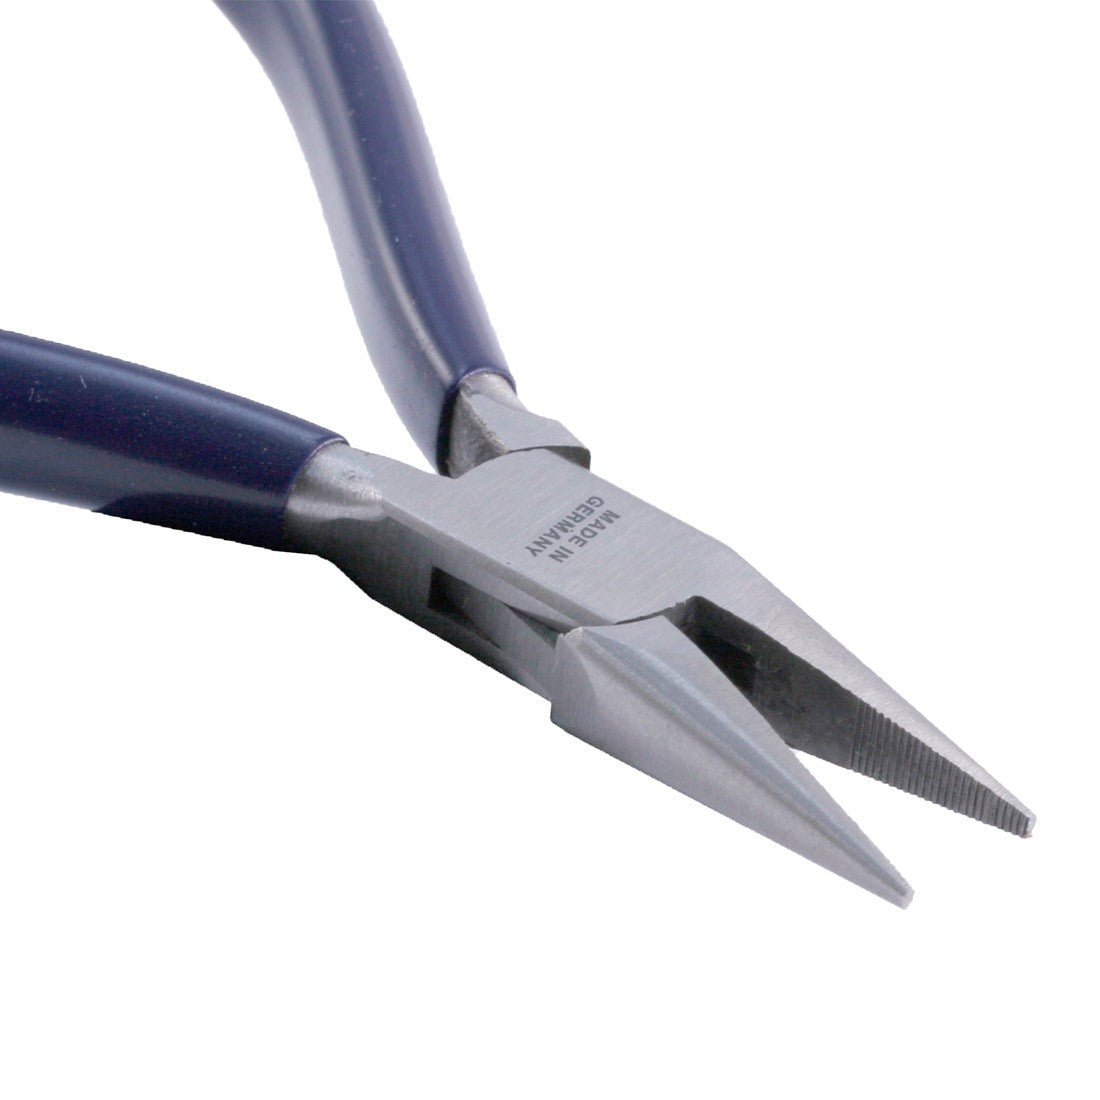 PL-202, Precision 5" Extra-Duty German Box-Joint Pliers, Chain Nose 5" (125mm)